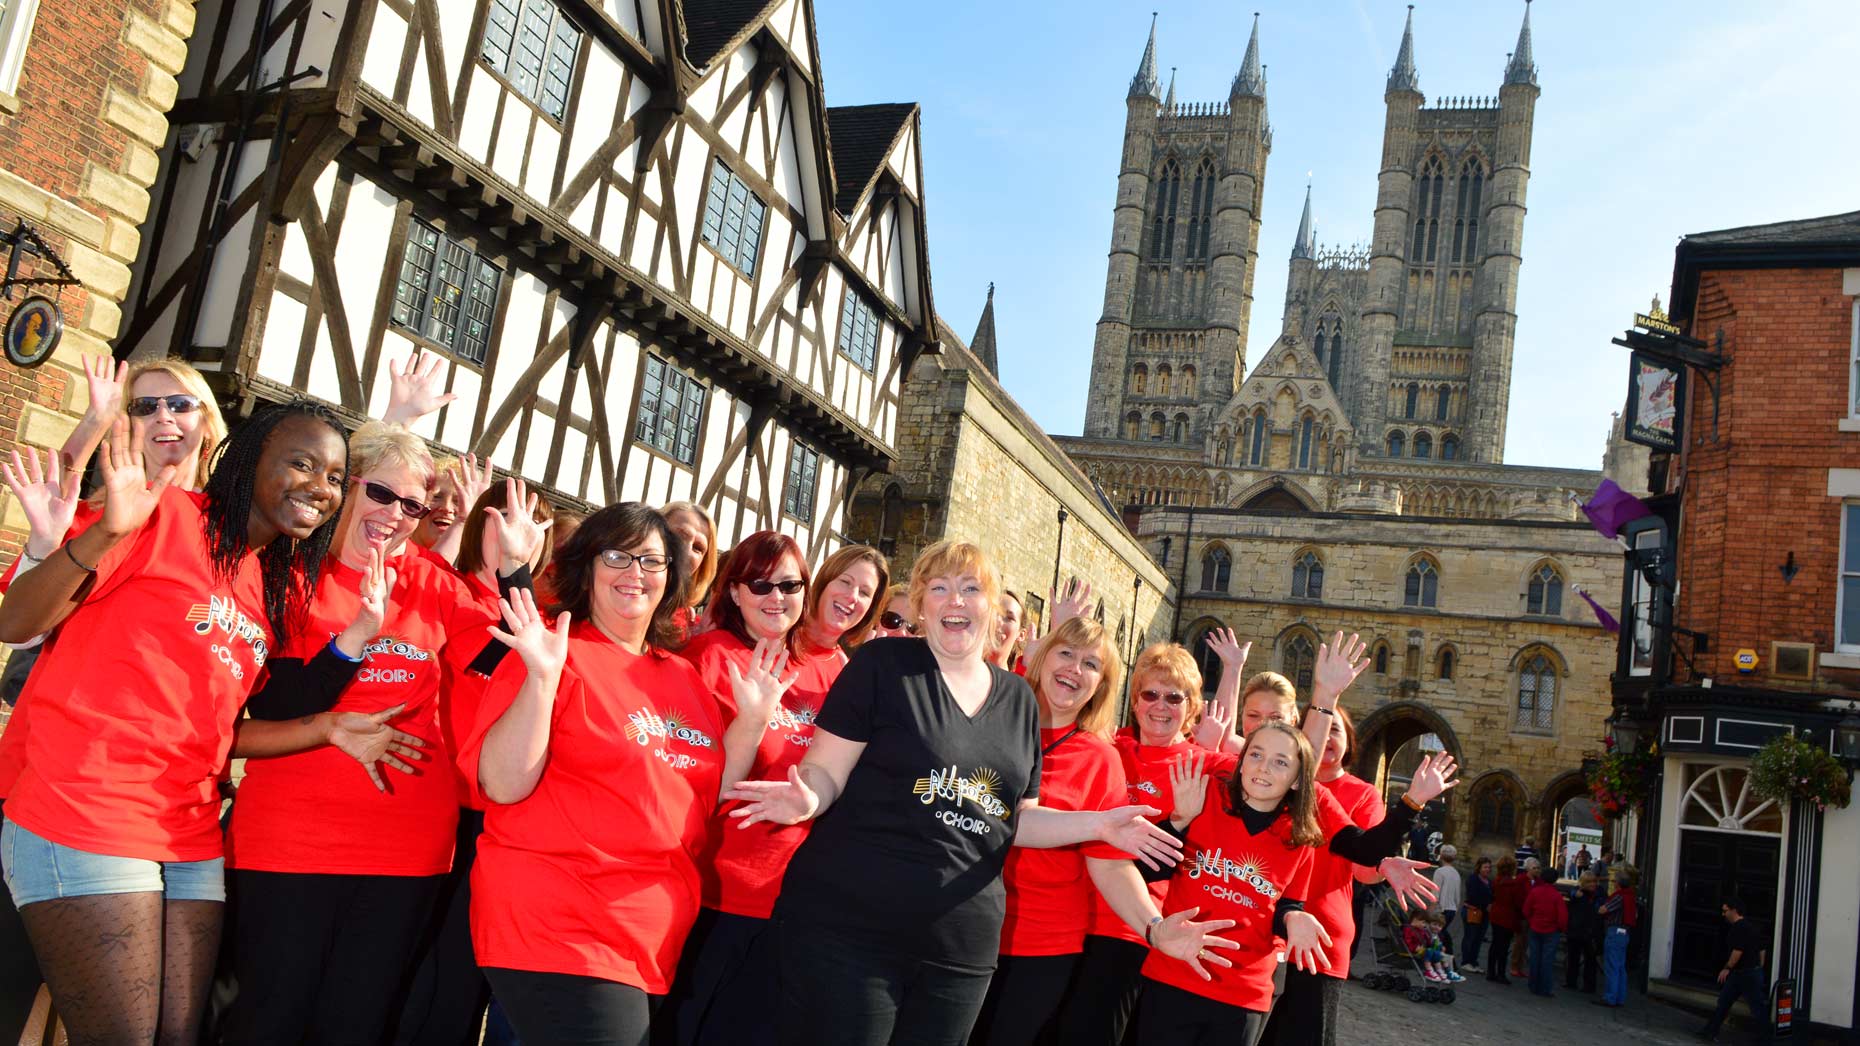 All for One Choir performed popular hits in Lincoln city centre on September 28. Photo: Steve Smailes for The Lincolnite